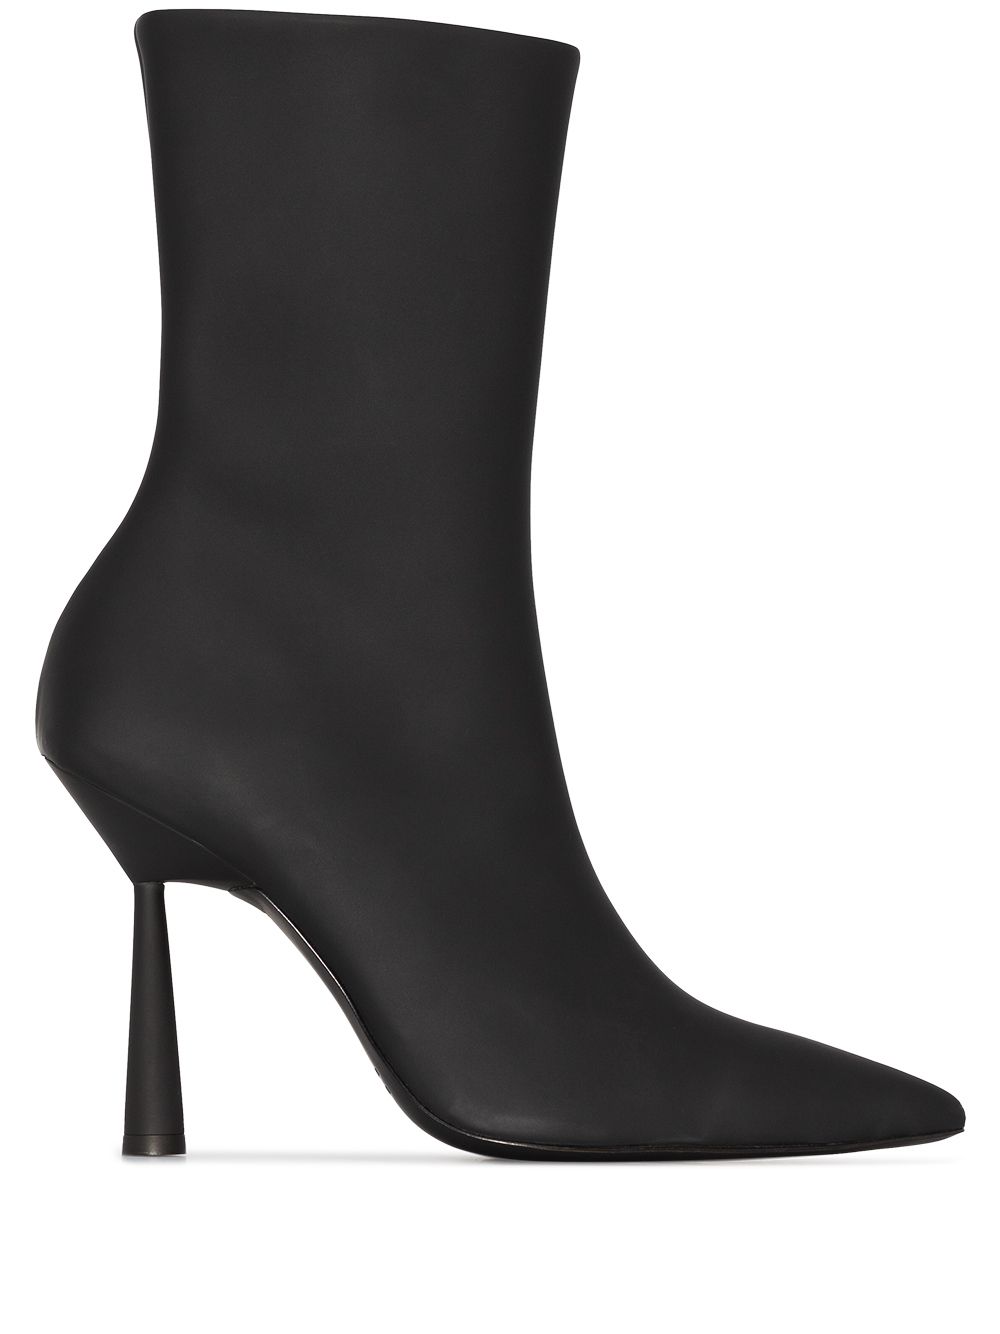 GIA BORGHINI x RHW Rosie 7 100mm ankle boots | Smart Closet